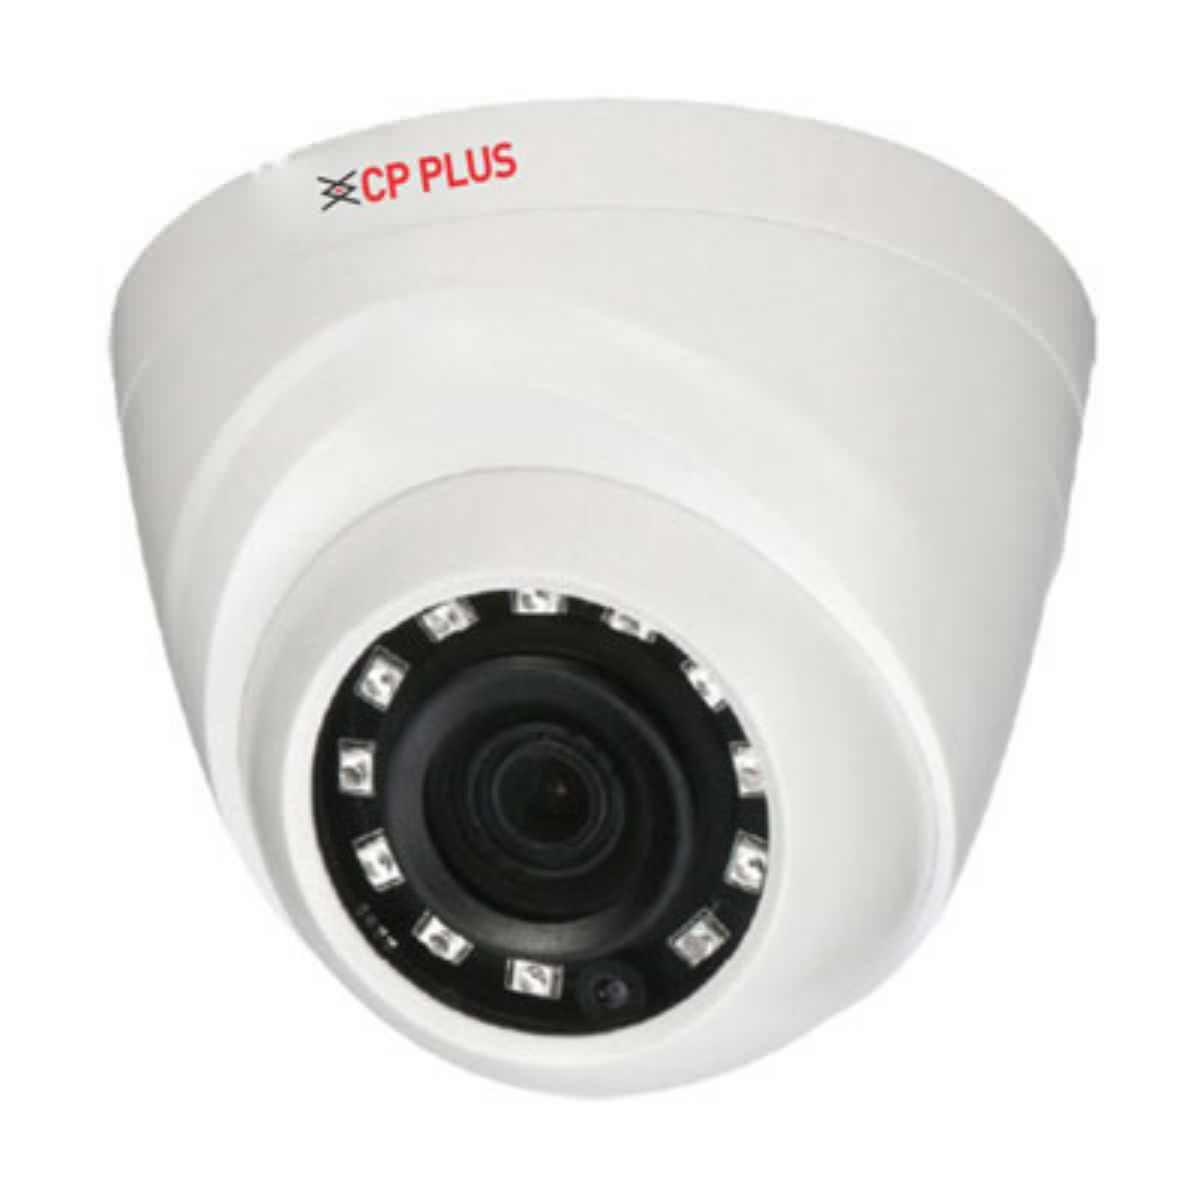 IP Camera vs Dome camera - which is Best for Use?